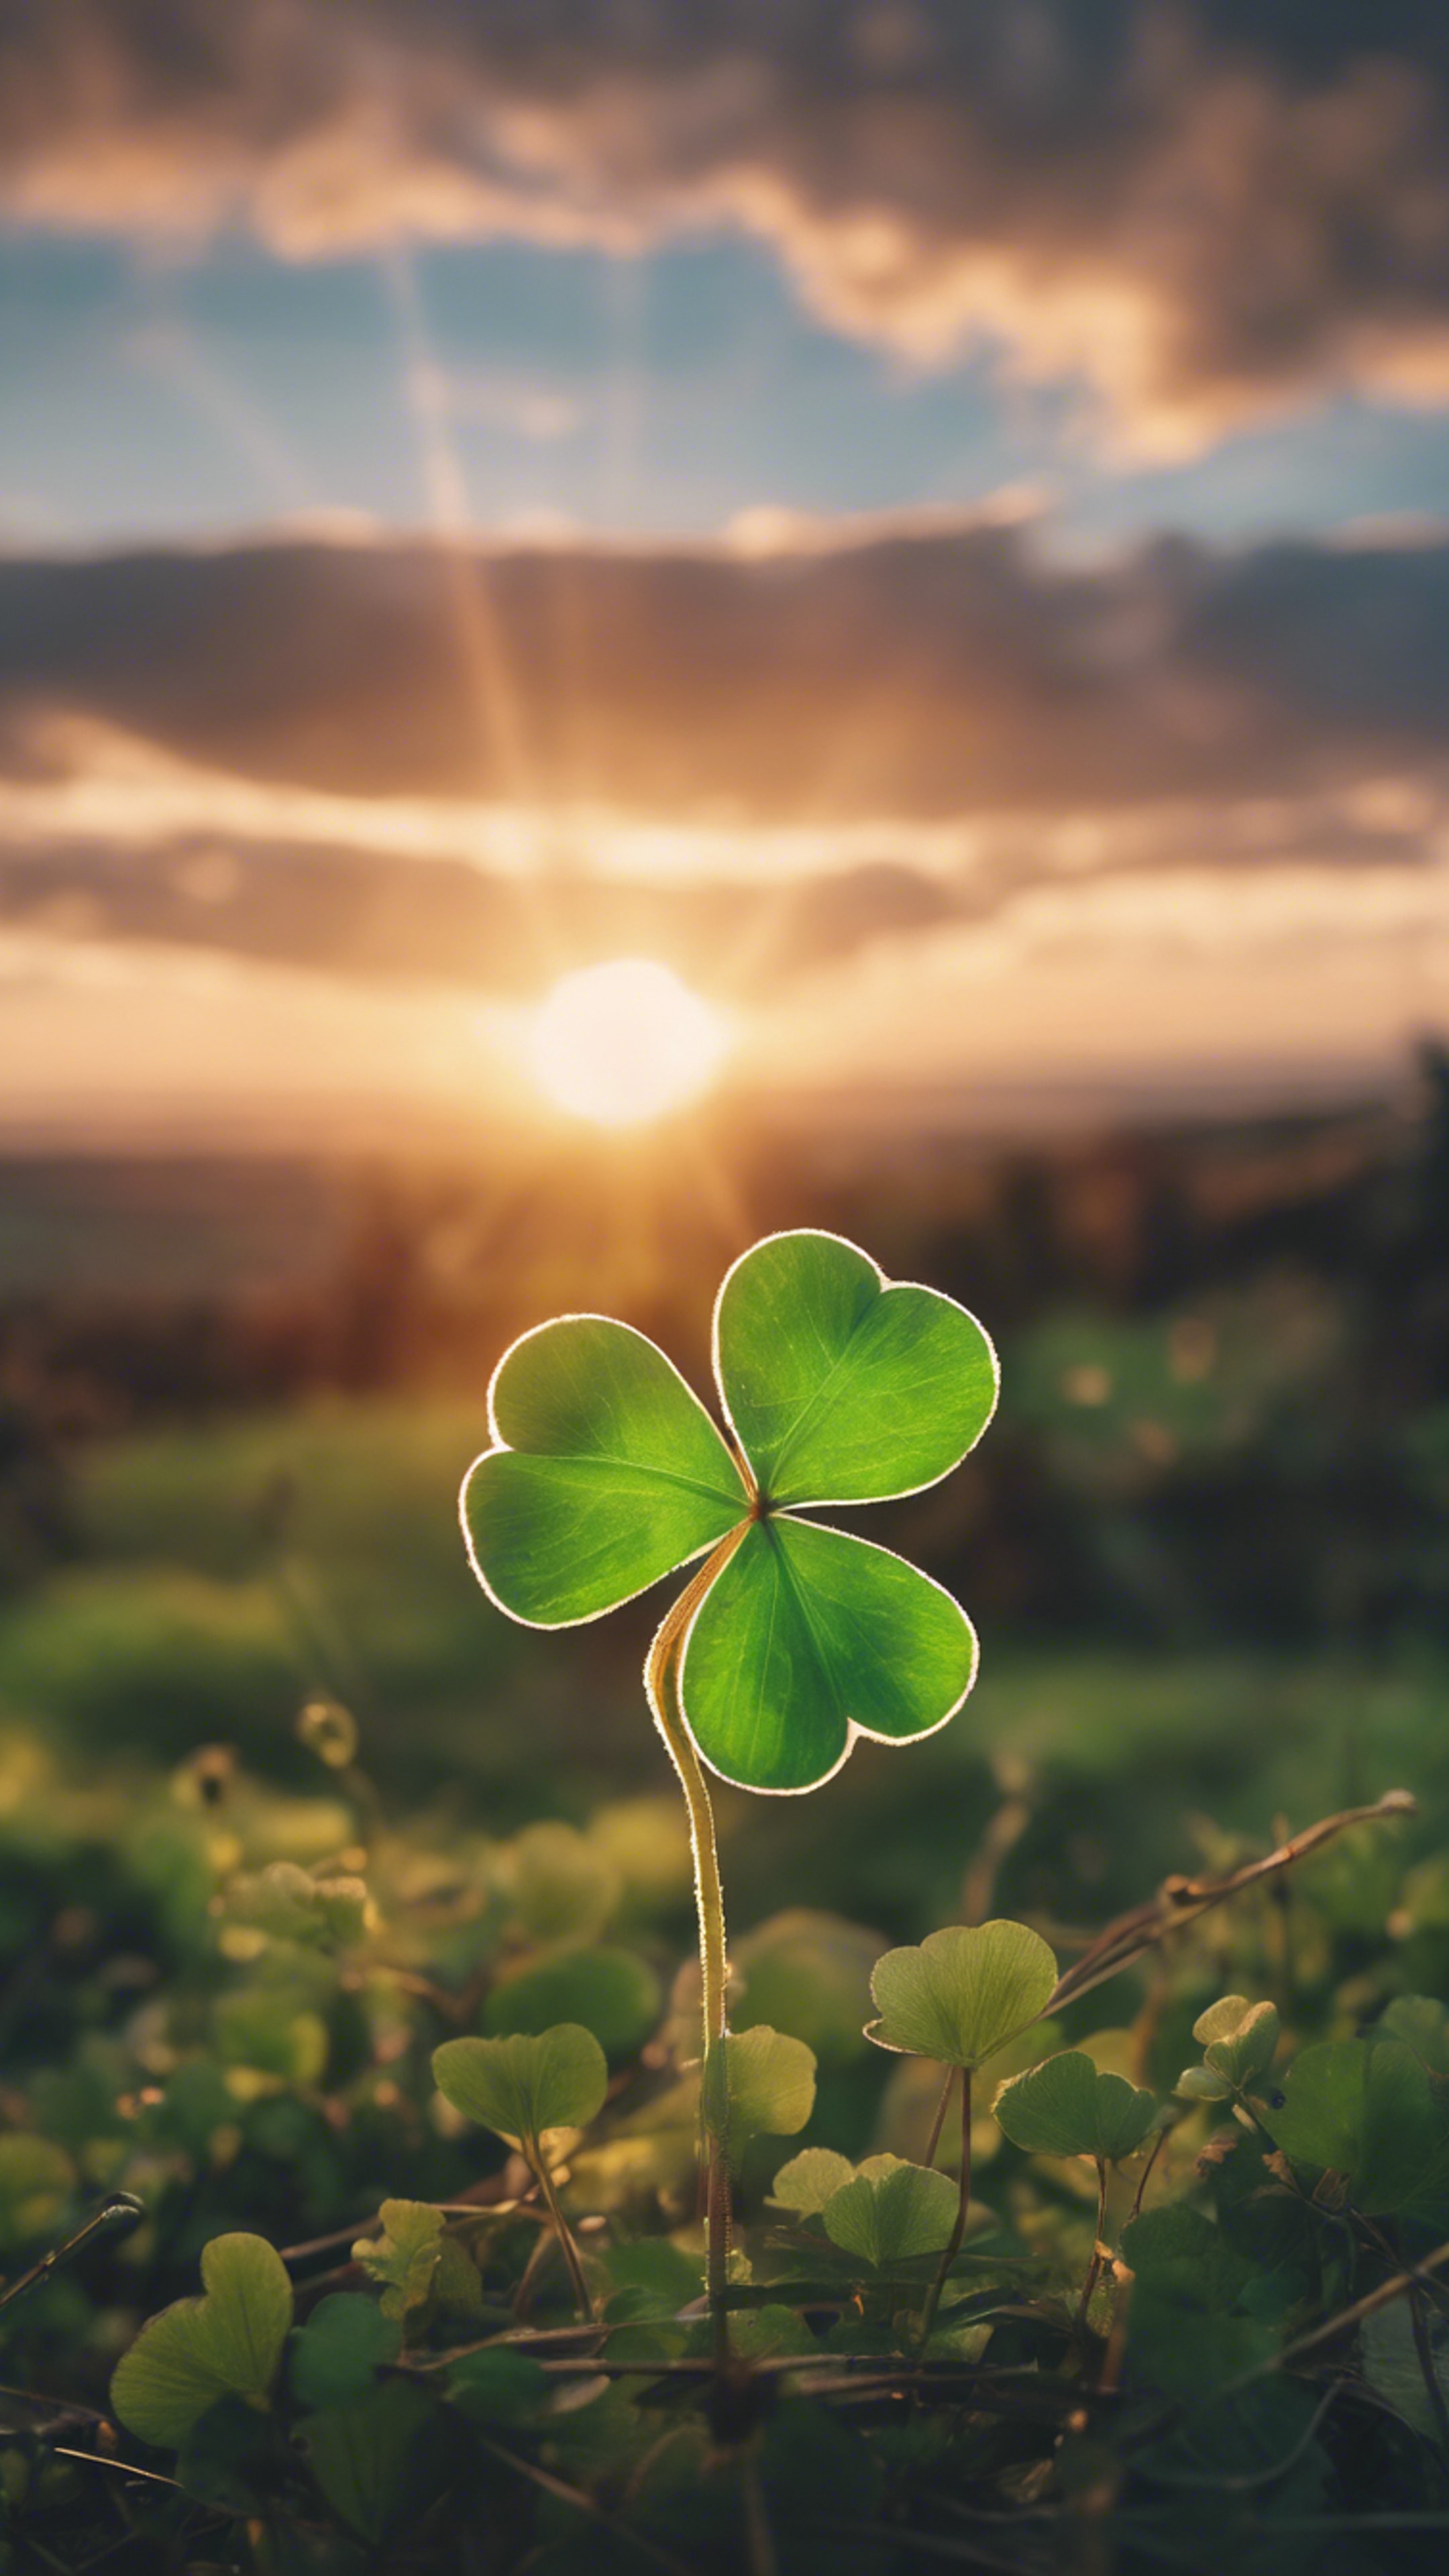 An enchanting sunset over the Irish countryside with a four-leaf clover in the foreground on St. Patrick's Day. کاغذ دیواری[4ad1db603cc8494da5b1]